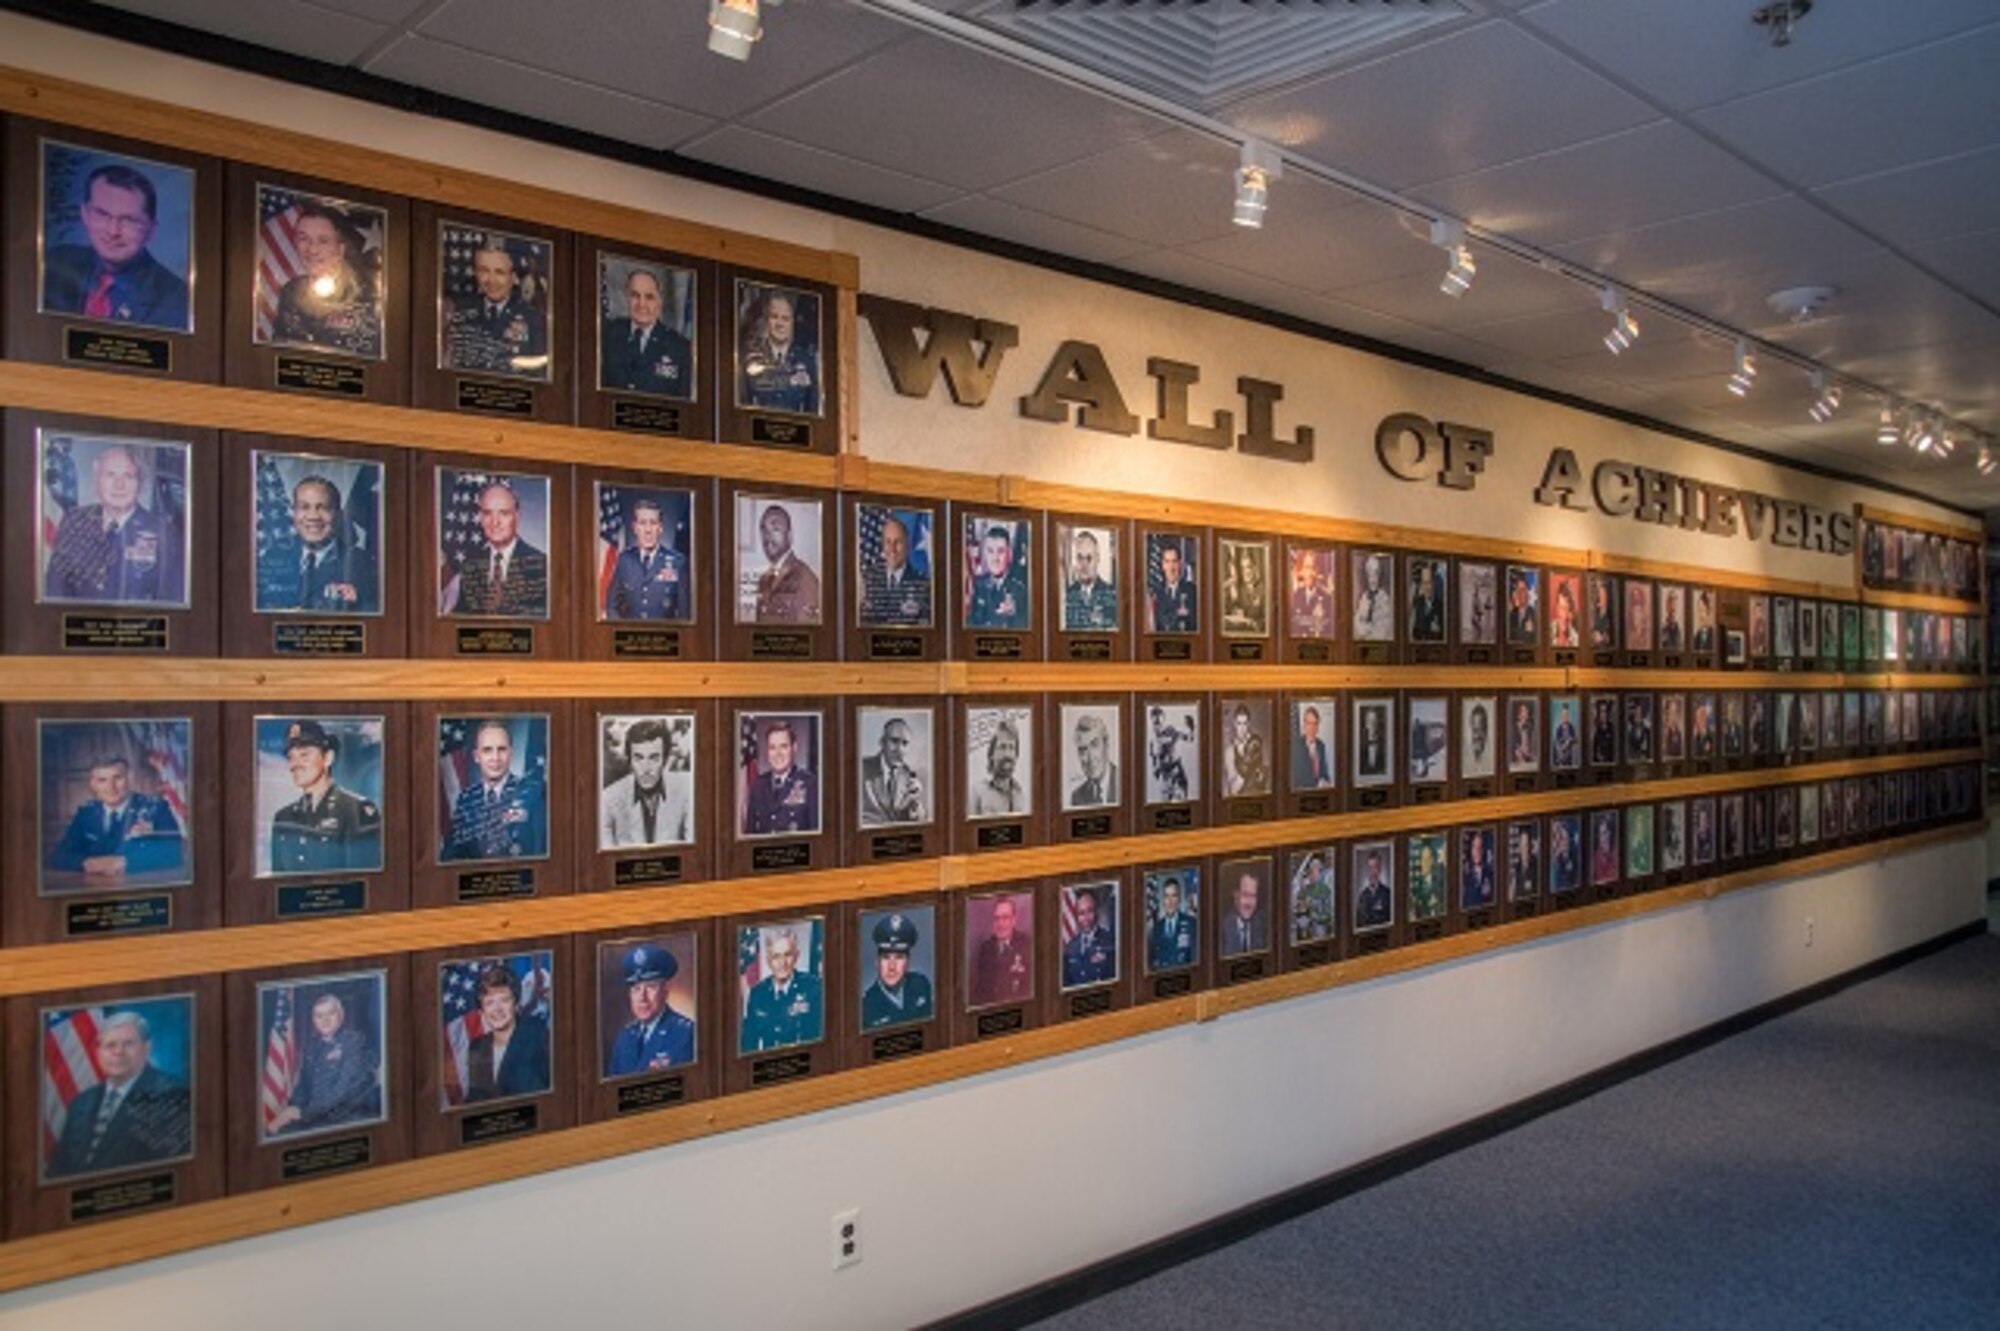 Wall of Achievers